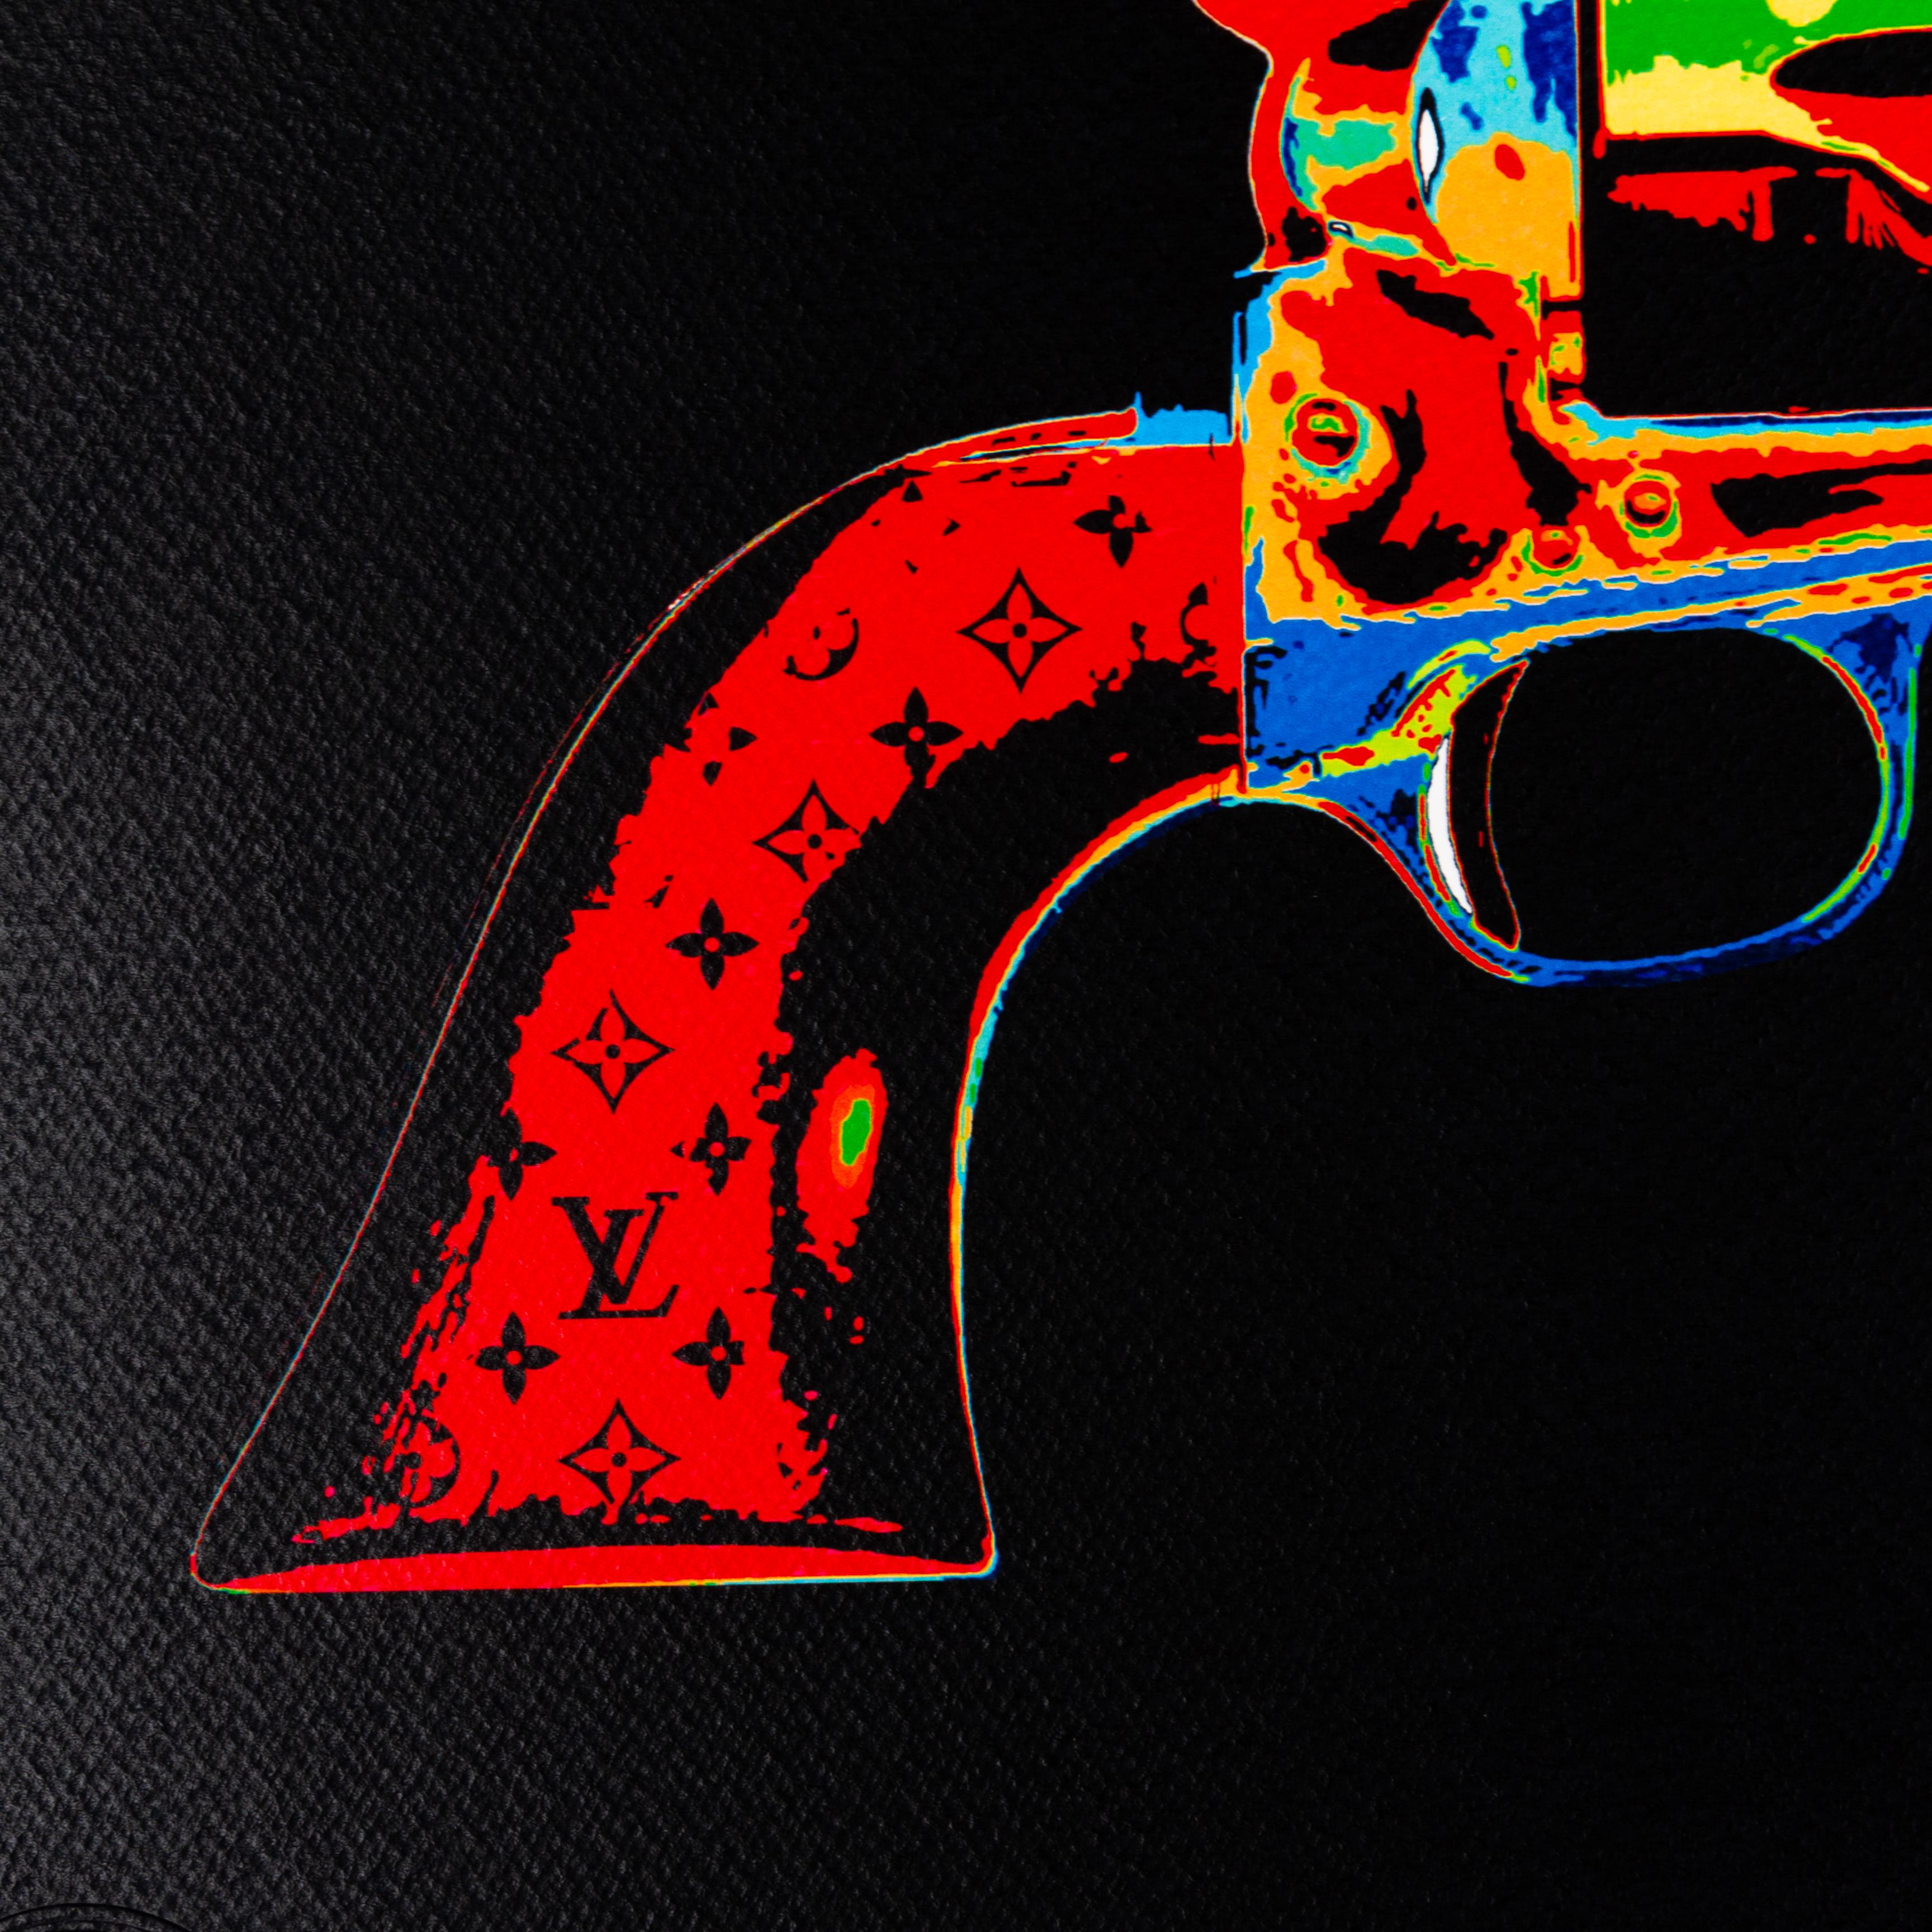 From a private collection.
Death NYC Signed Limited Ed Pop Art Print Louis Vuitton Pistol